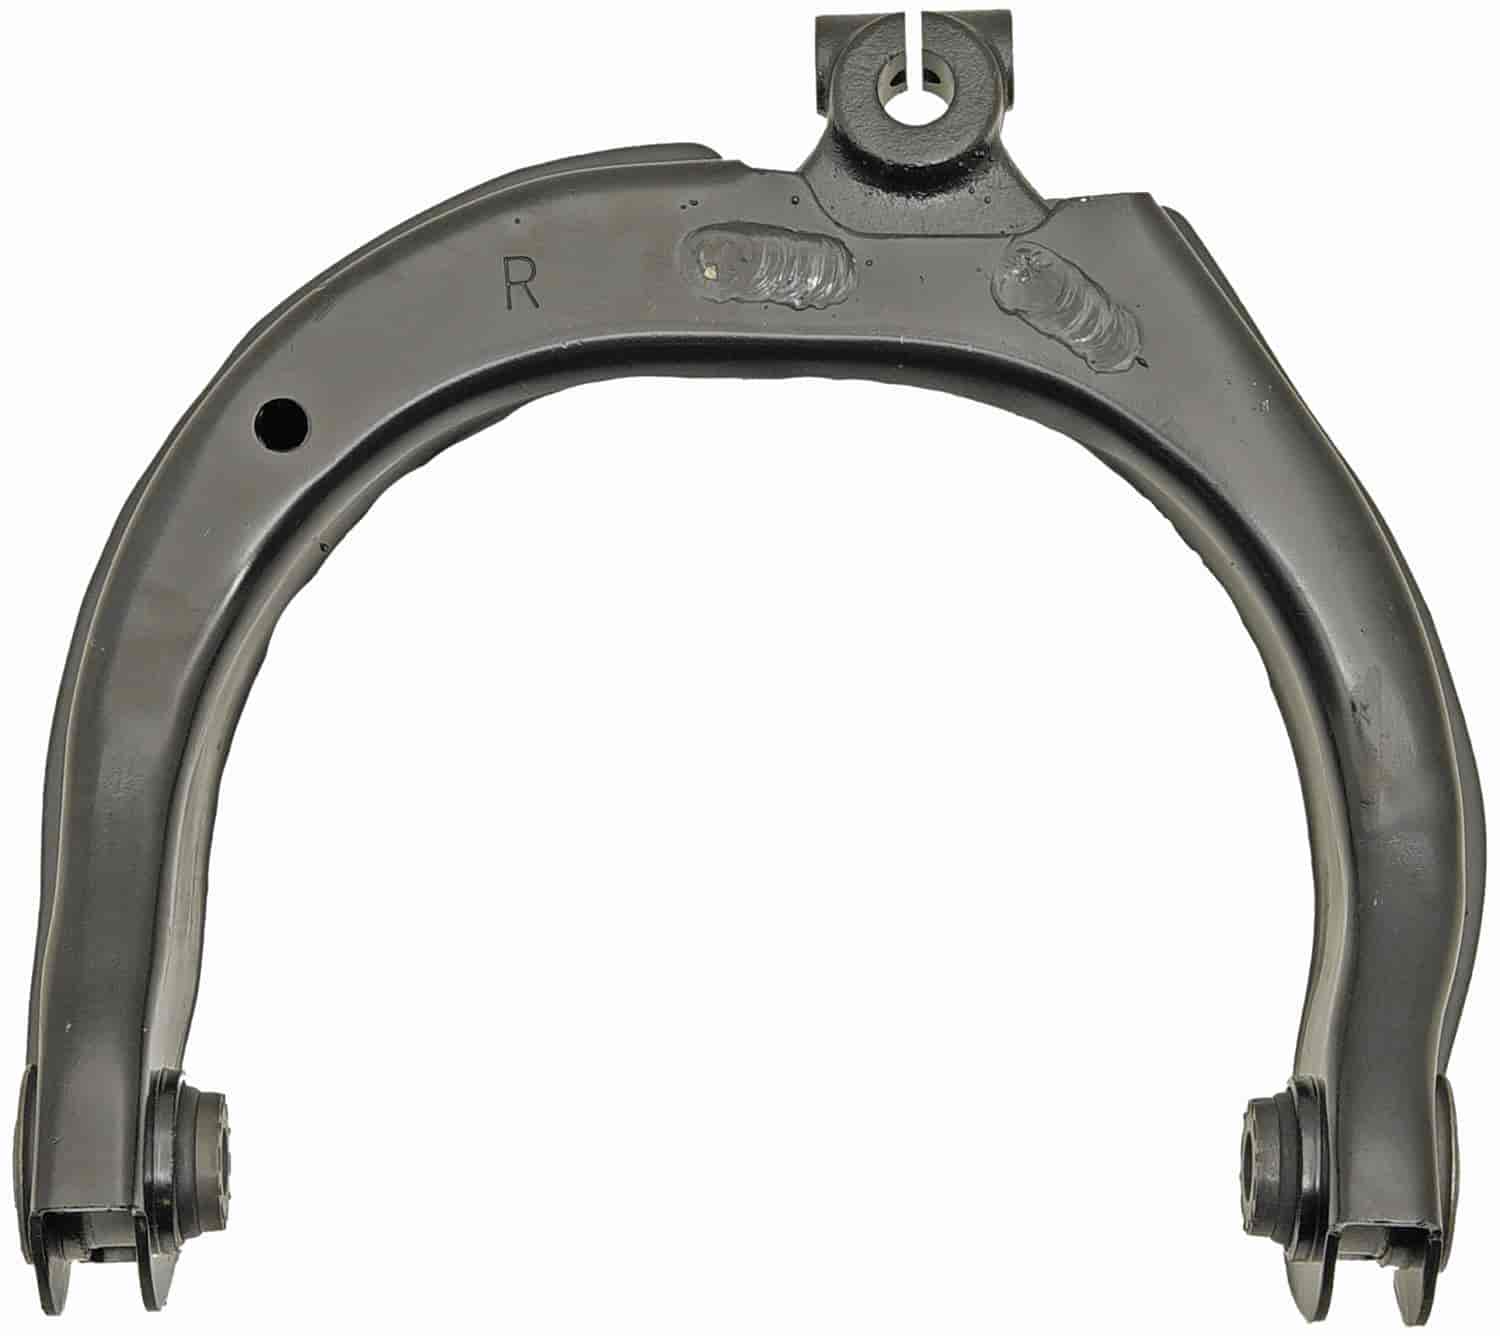 Upper Control Arm 2002-2009 Chevy/GMC, 2002-2004 Oldsmobile, 2003-2008 Isuzu, 2004-2007 Buick, 2005-2009 Saab - Front Right